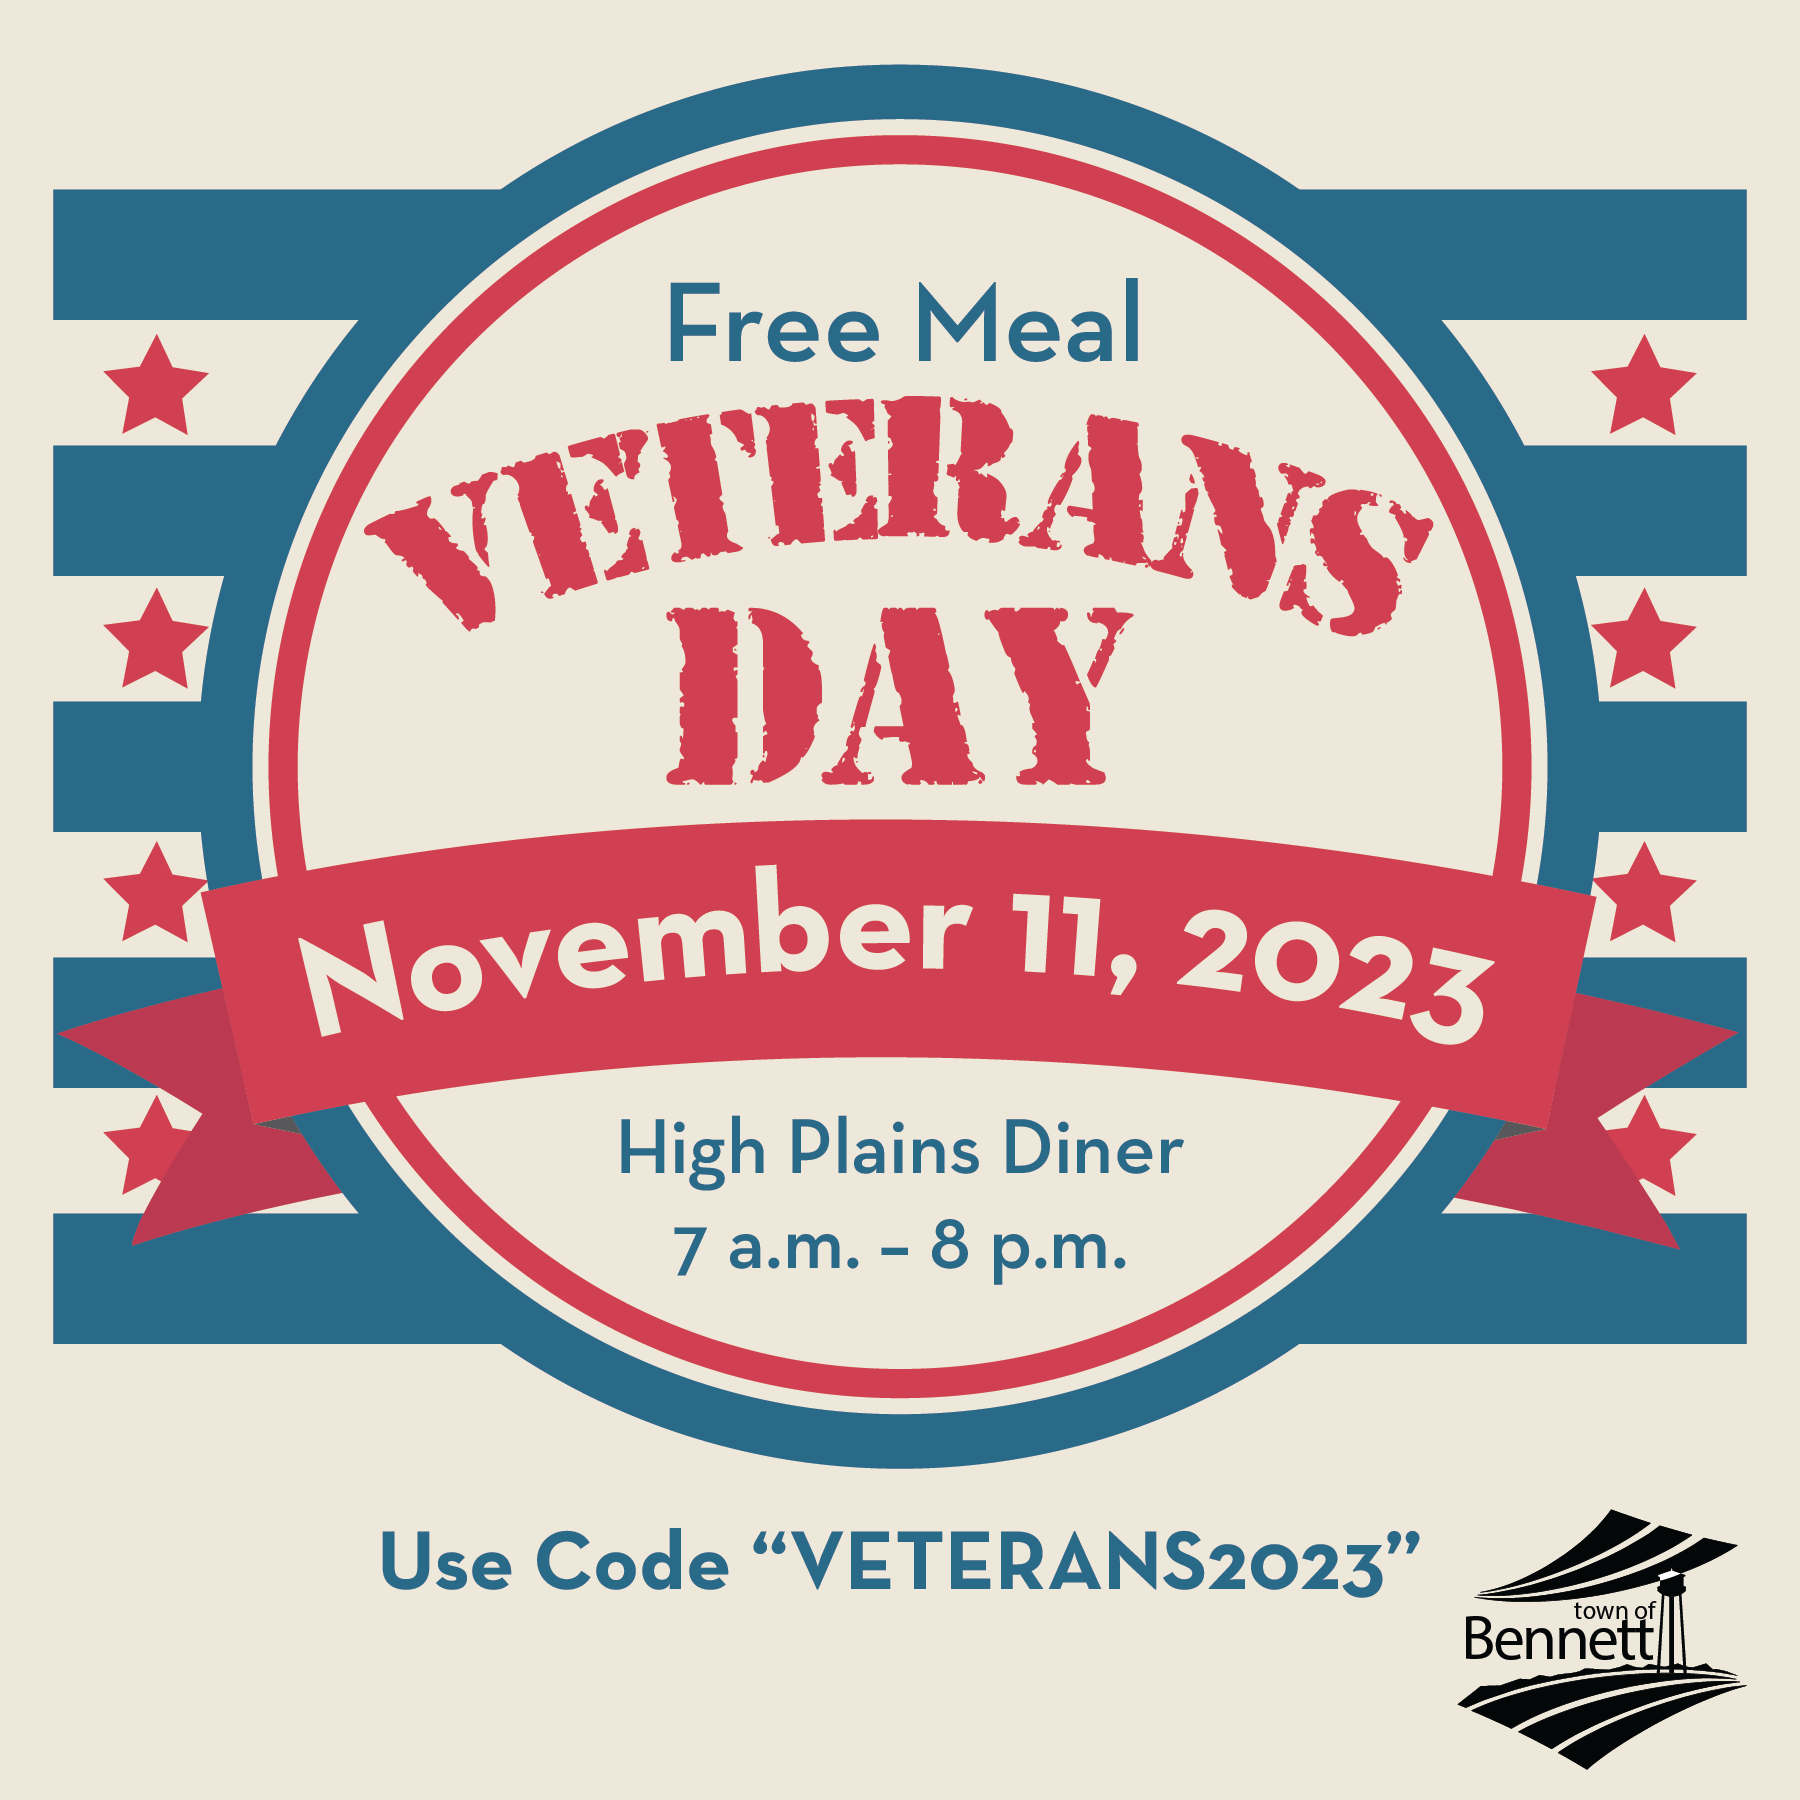 Free Meal Veterans Day November 11, 2023 High Plains Diner 7 a.m. - 8 p.mm. Use Code Veterans 2023